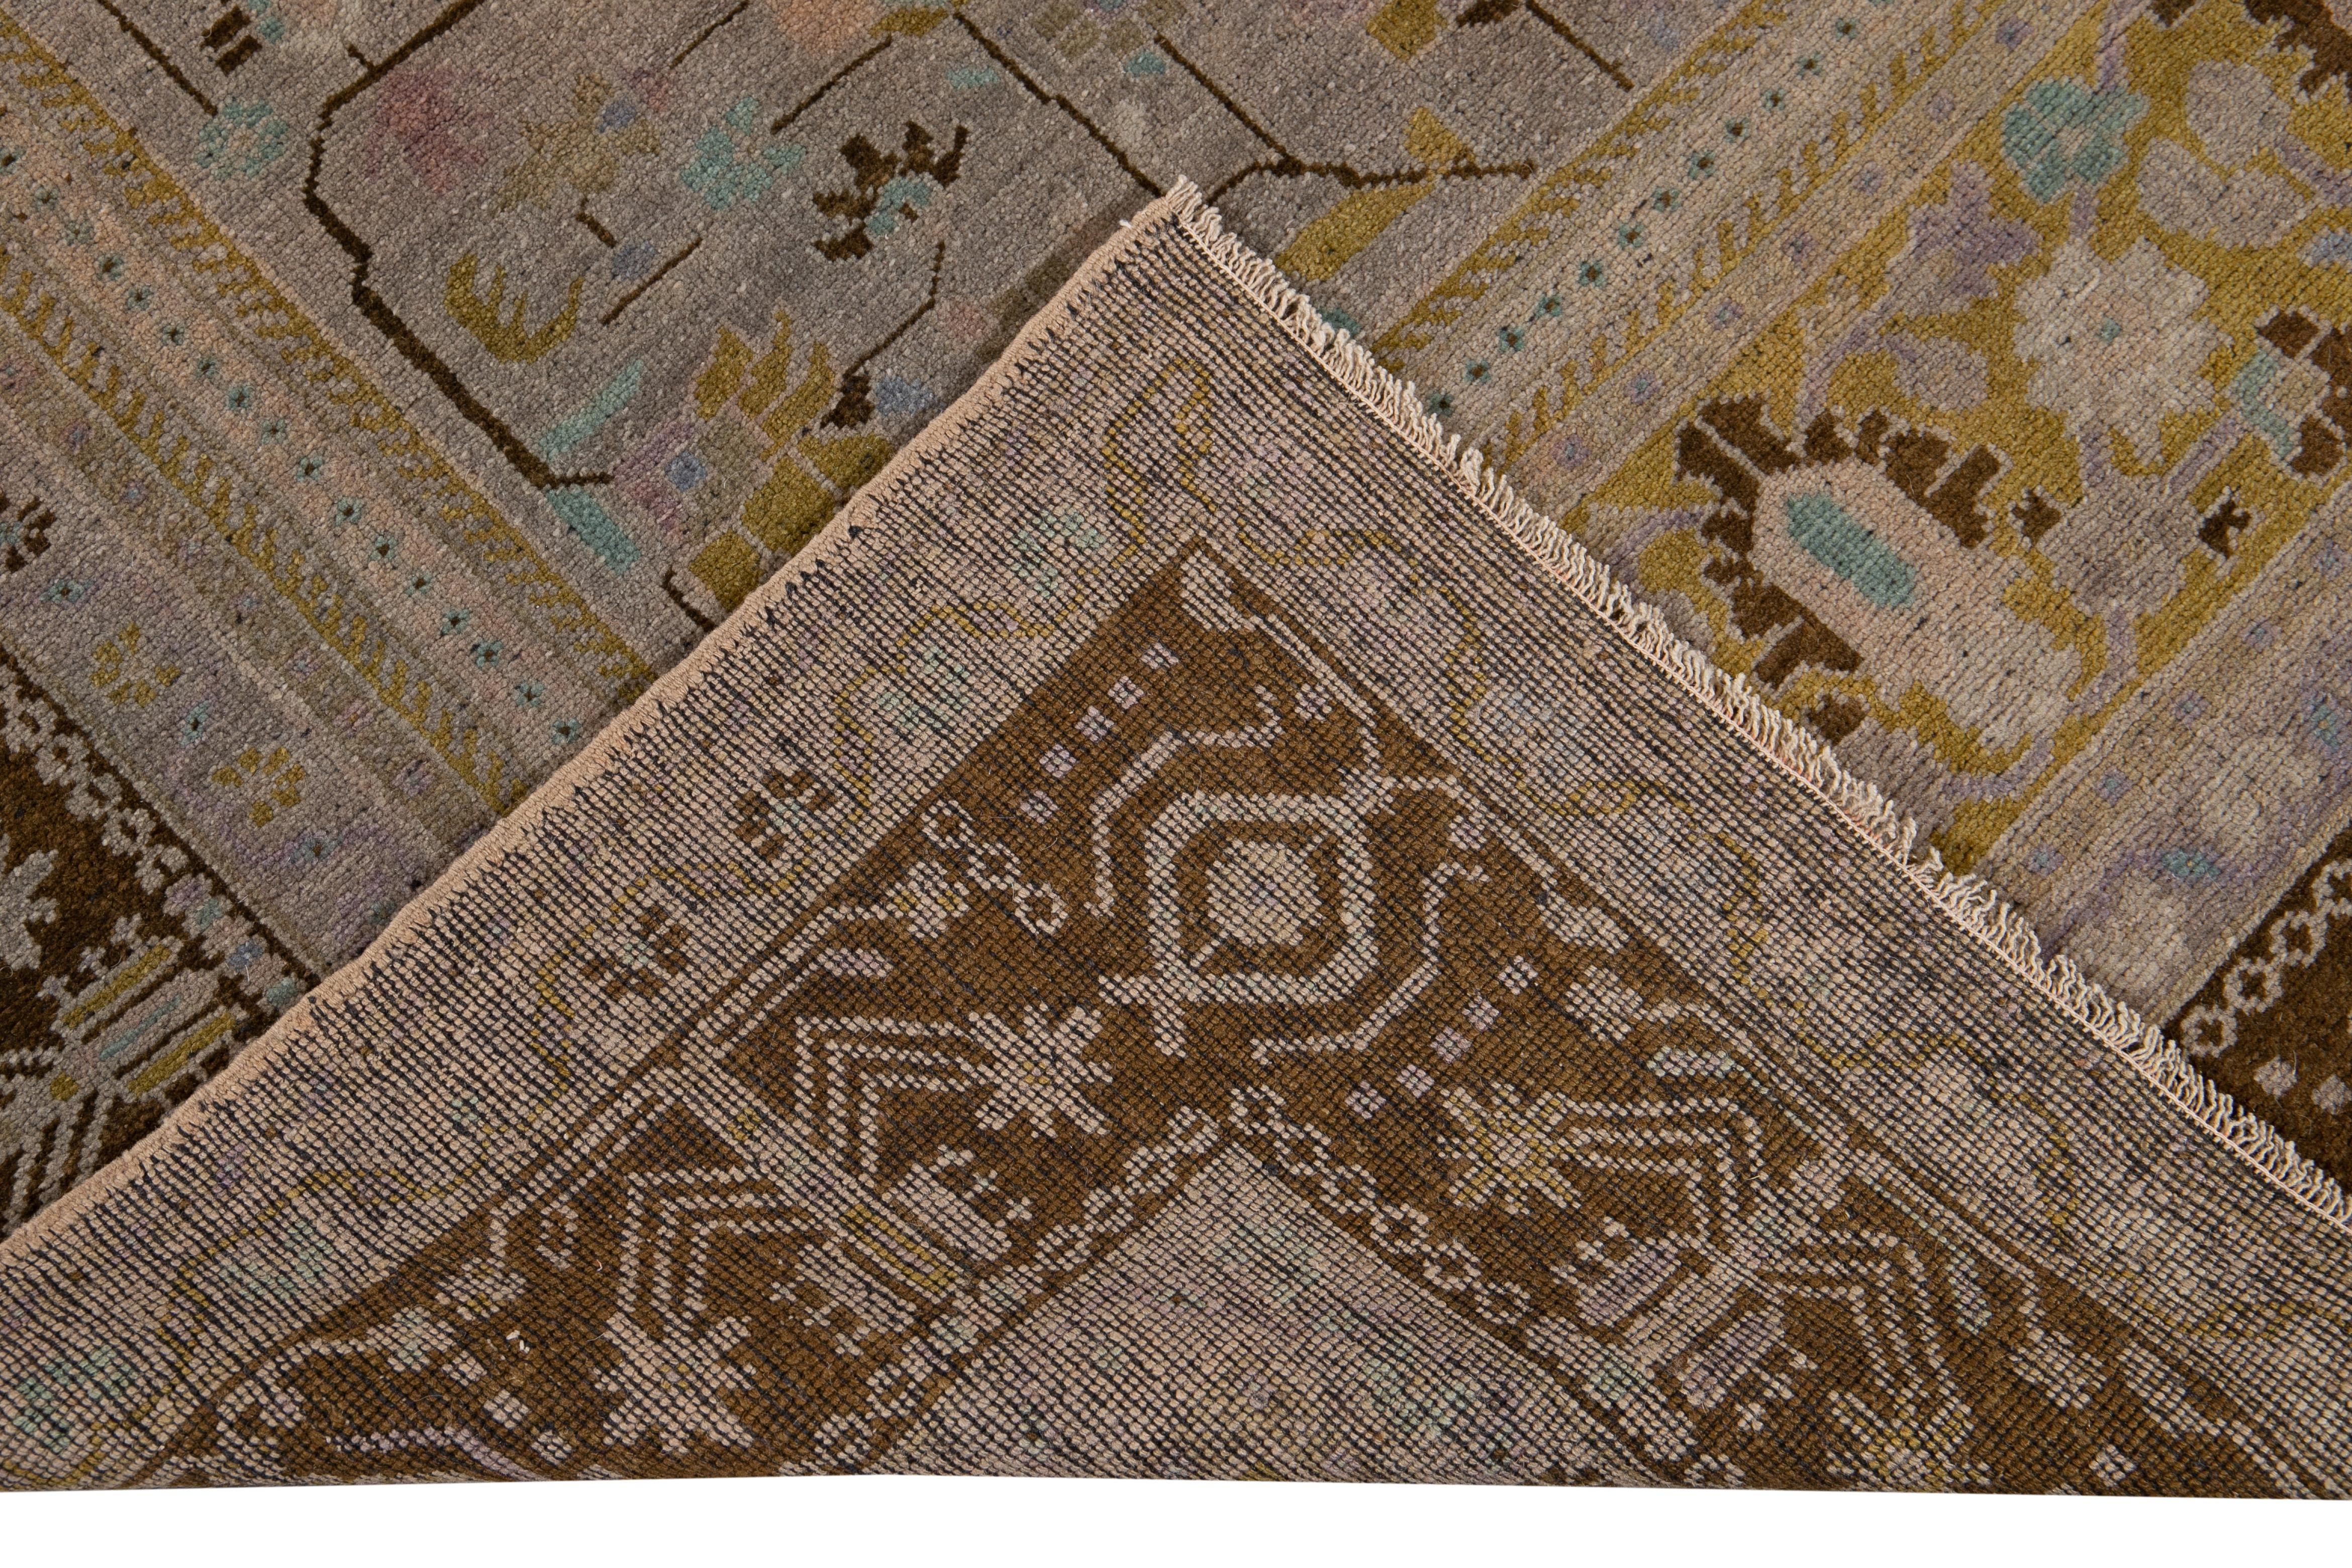 Beautiful antique Khotan hand-knotted wool rug with a Tan field. This Khotan rug has a brown designed frame with Lila, blue, and brown accents in an all-over geometric medallion floral design. 

This rug measures 7'5